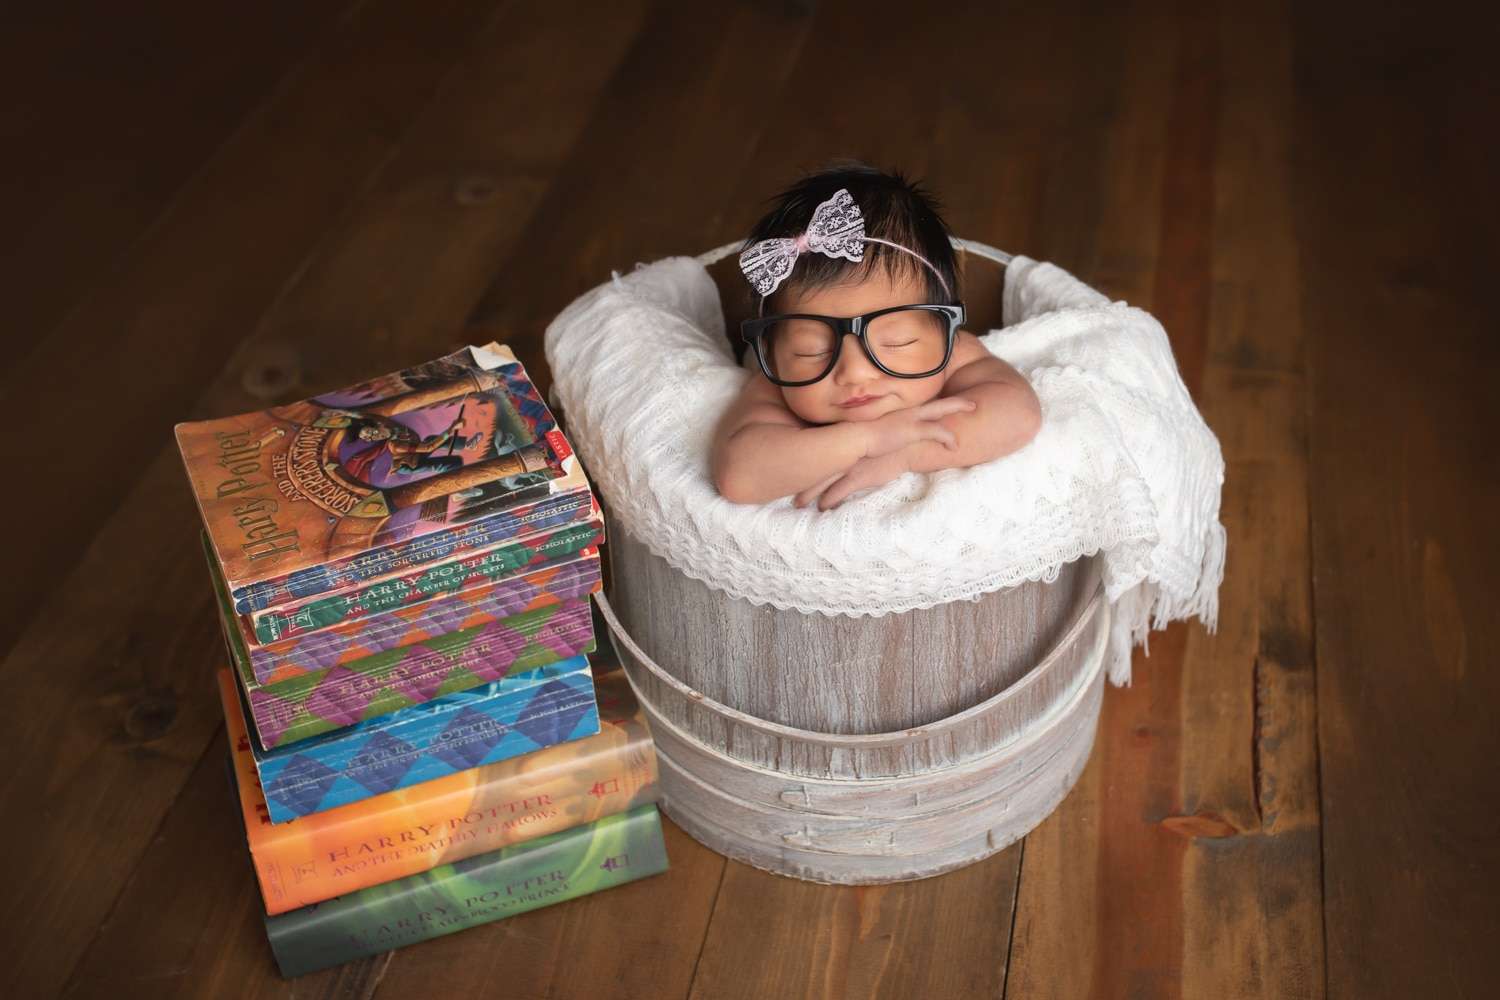 newborn photographer in rochester ny captures baby girl sleeping with Harry Potter books